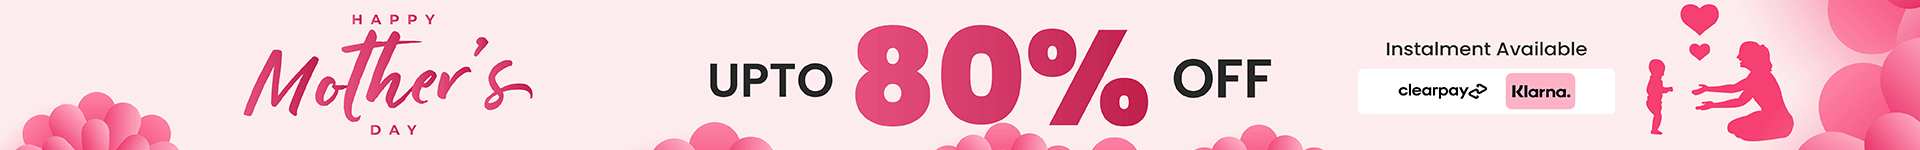 mothers-day-banner-offer-80-percent